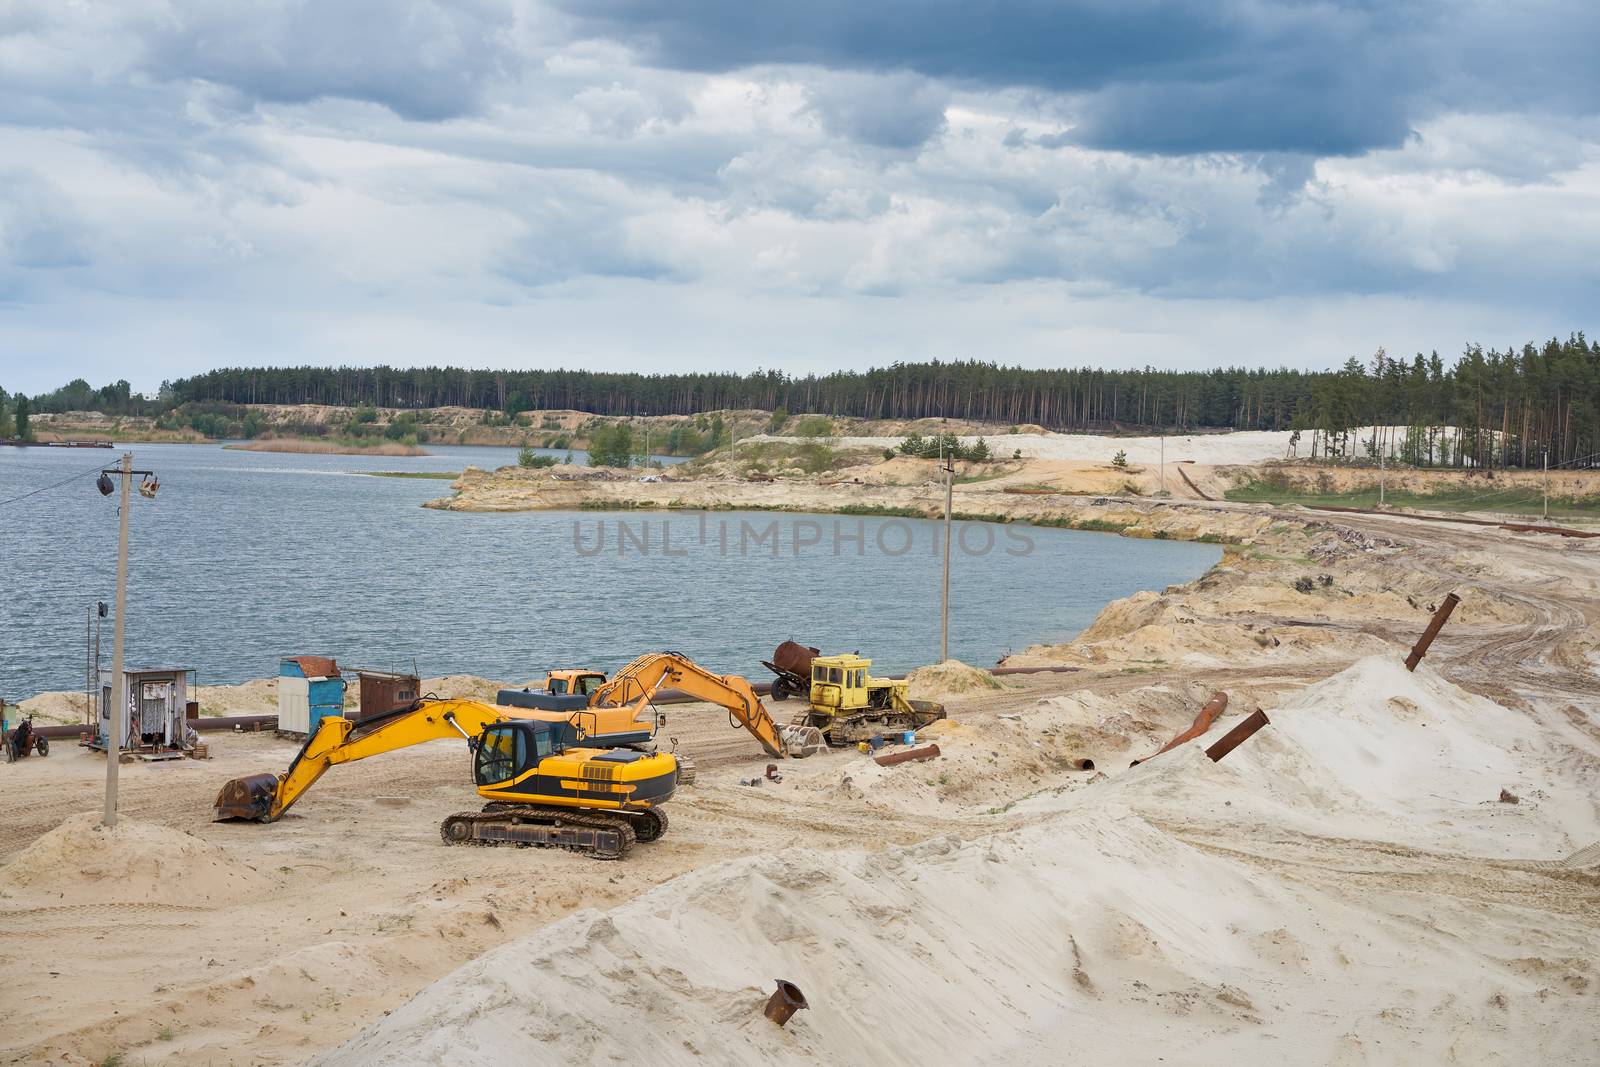 Sand quarry mining industry equipment excavator tractor standing sand land near lake water Industrial activity mine operation summer sunny day. Ecology problem Non-renewable resources of the Earth